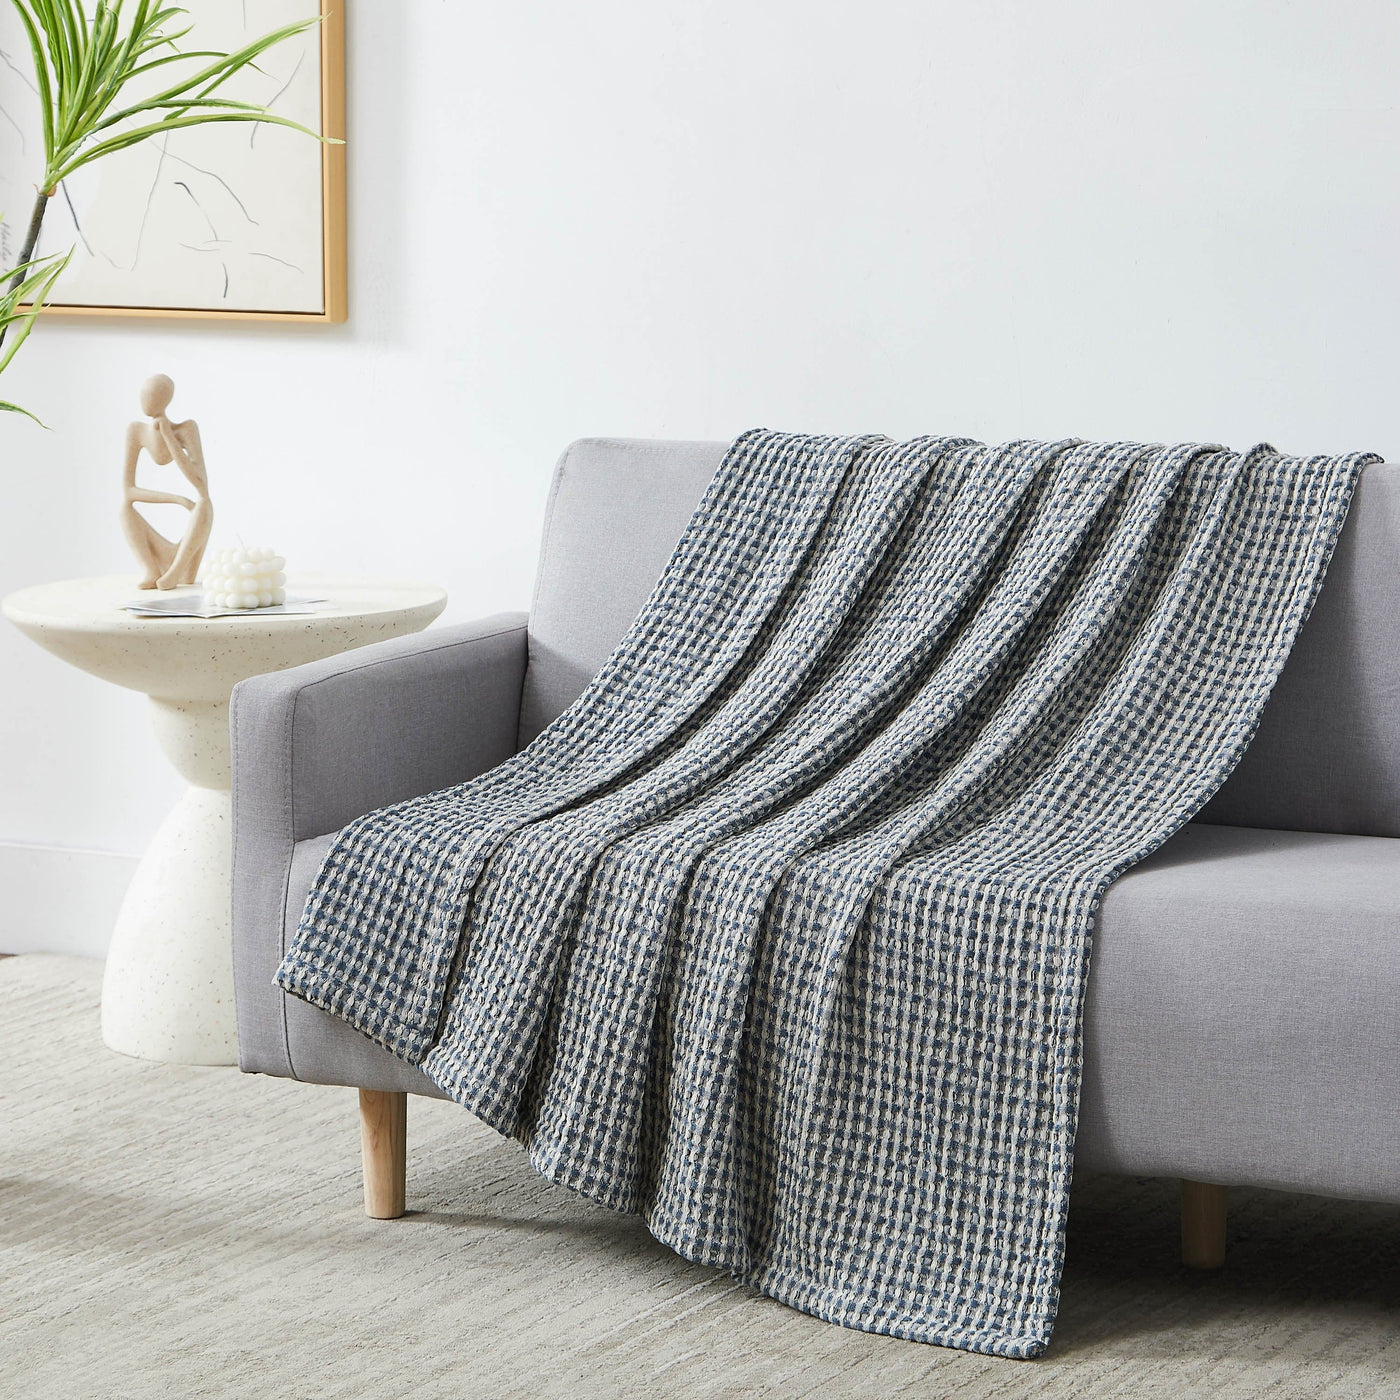 Tama Cotton Blanket and Throw in steel blue on sofa#color_tama-steel-blue